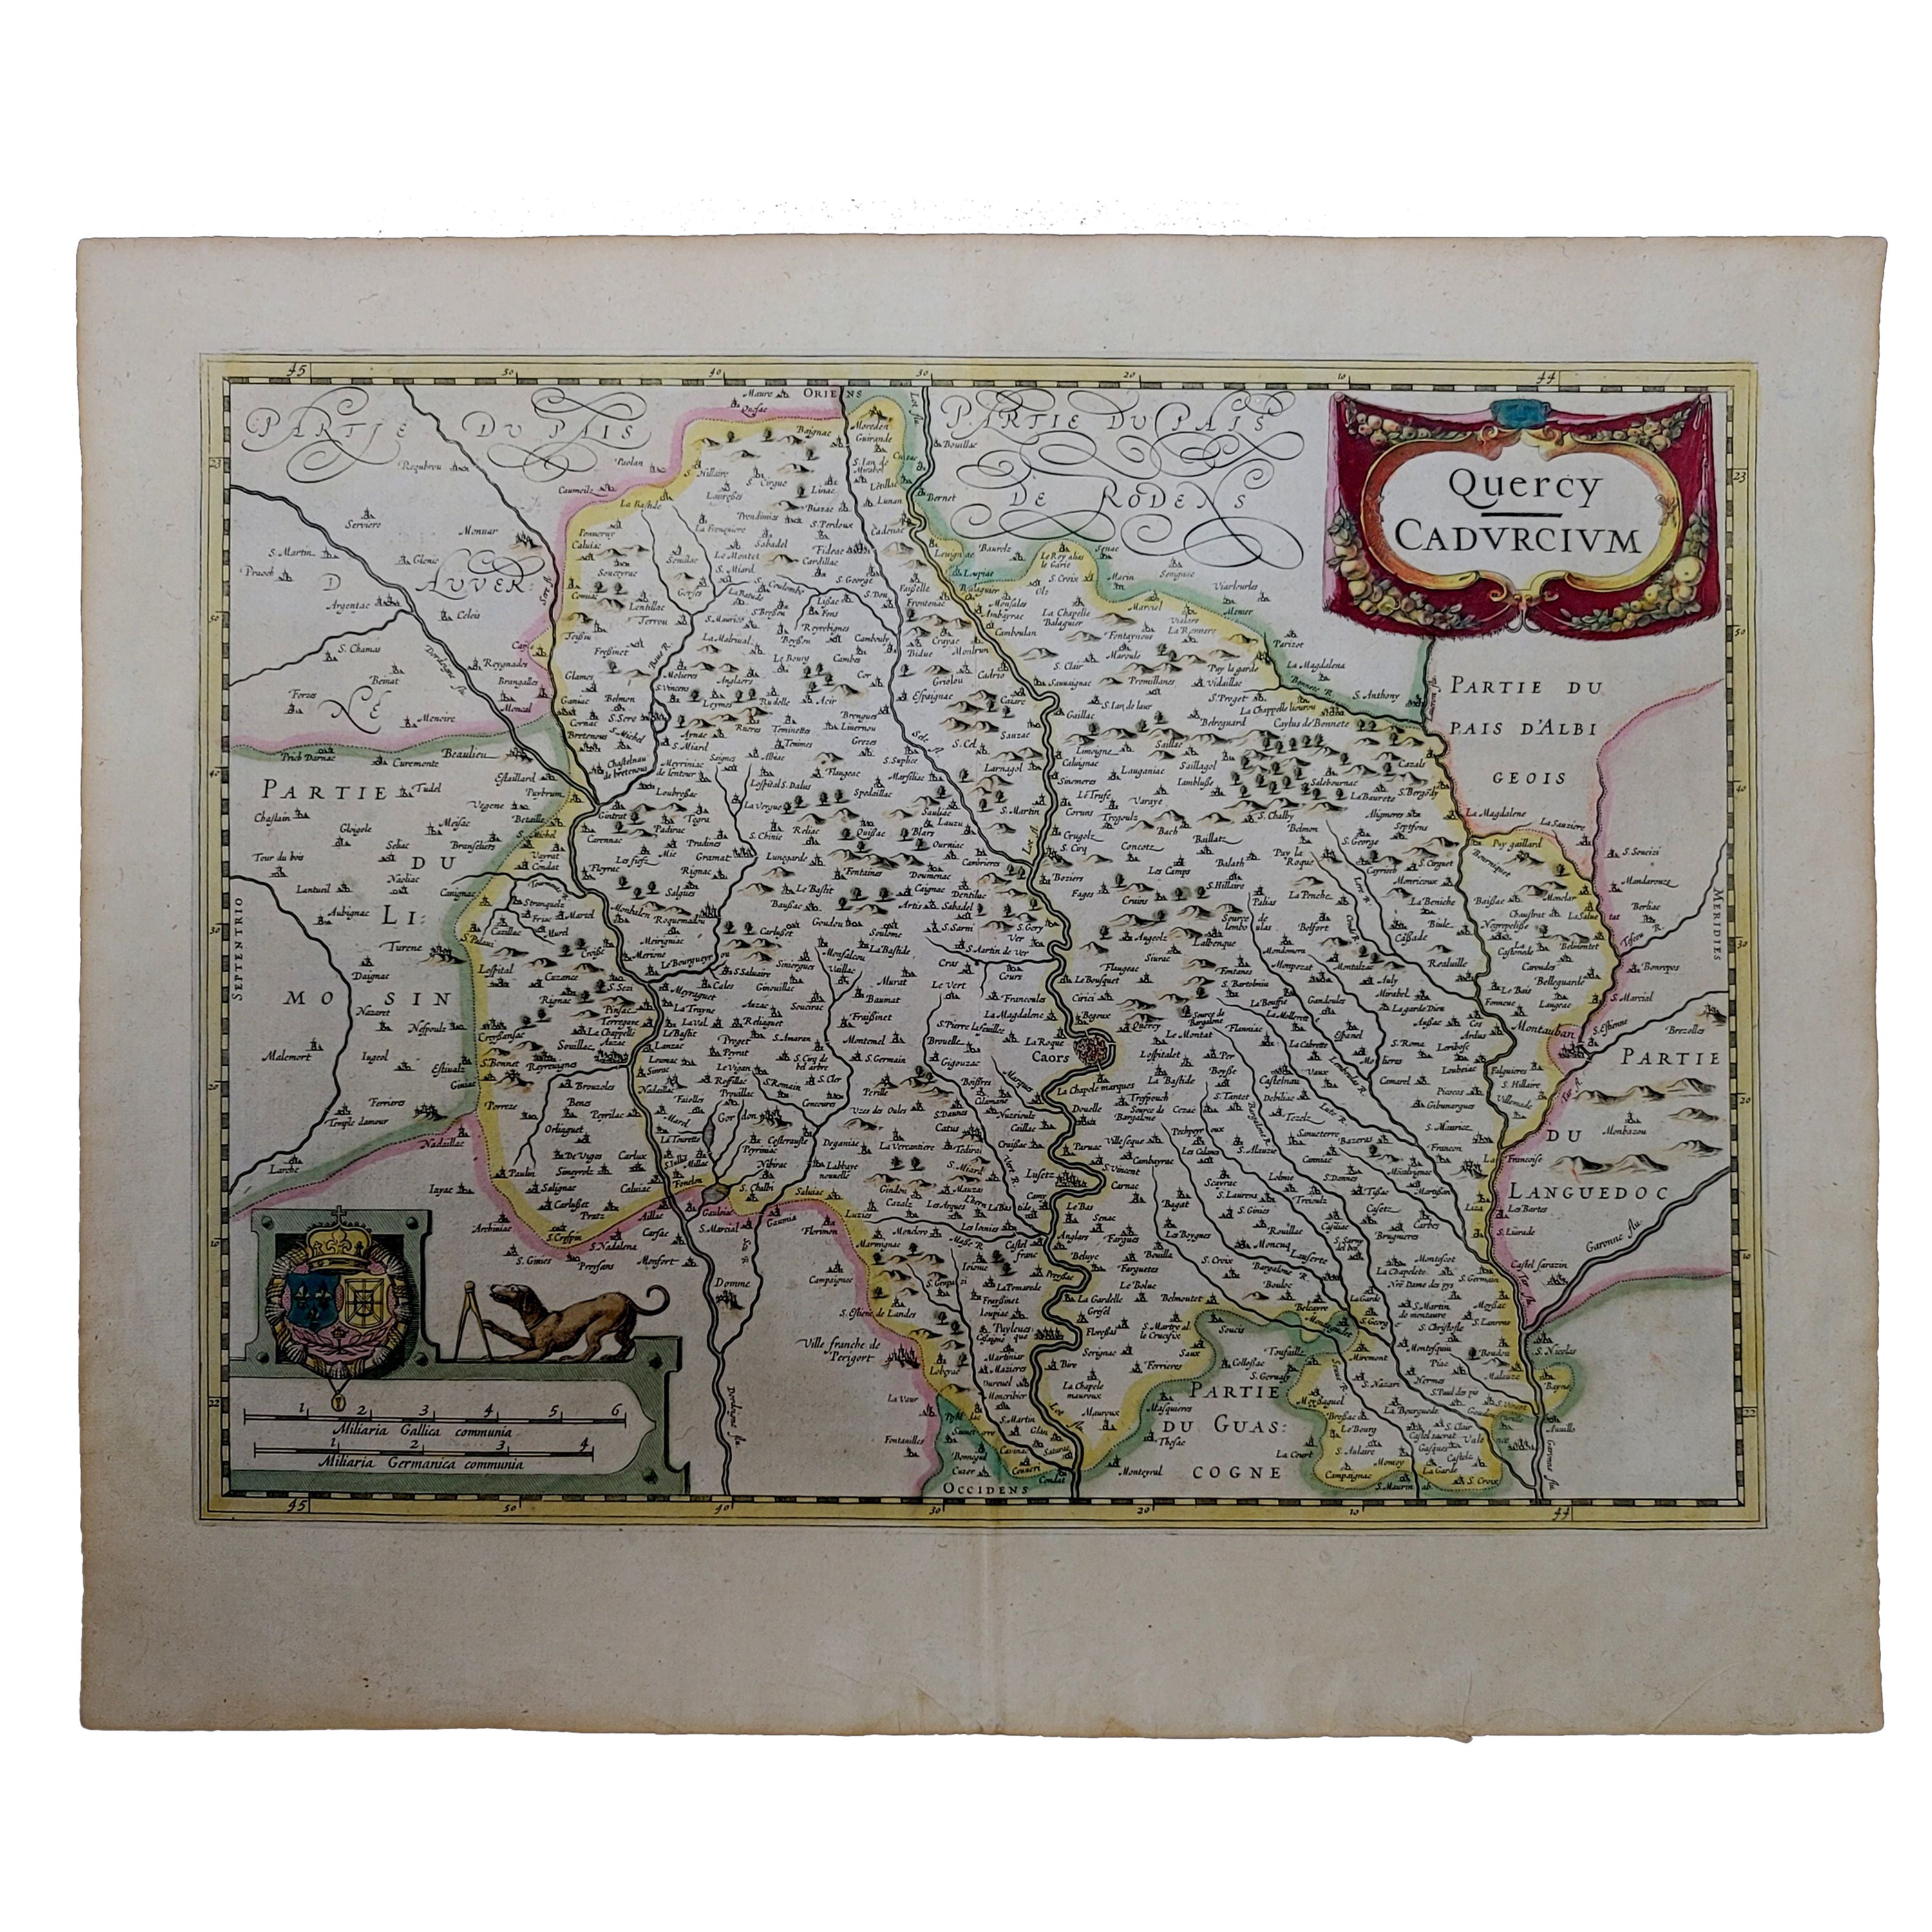 1625 Mercator Map of the Provenience of Quercy, "Quercy Cadvrcivm Ric.0013